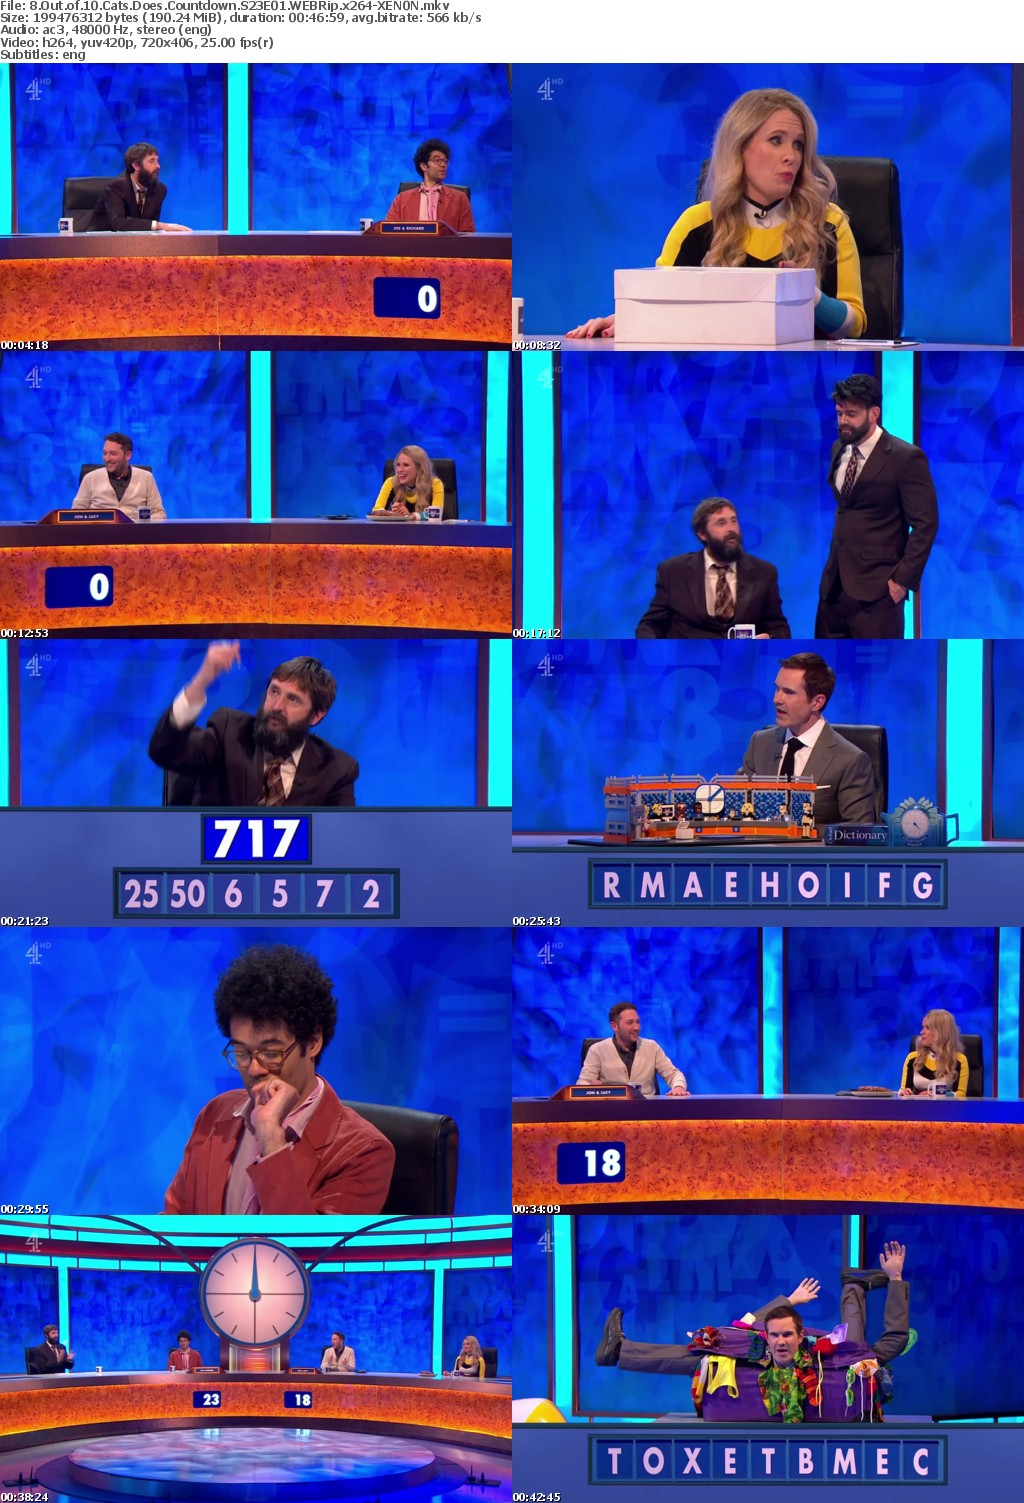 8 Out of 10 Cats Does Countdown S23E01 WEBRip x264-XEN0N